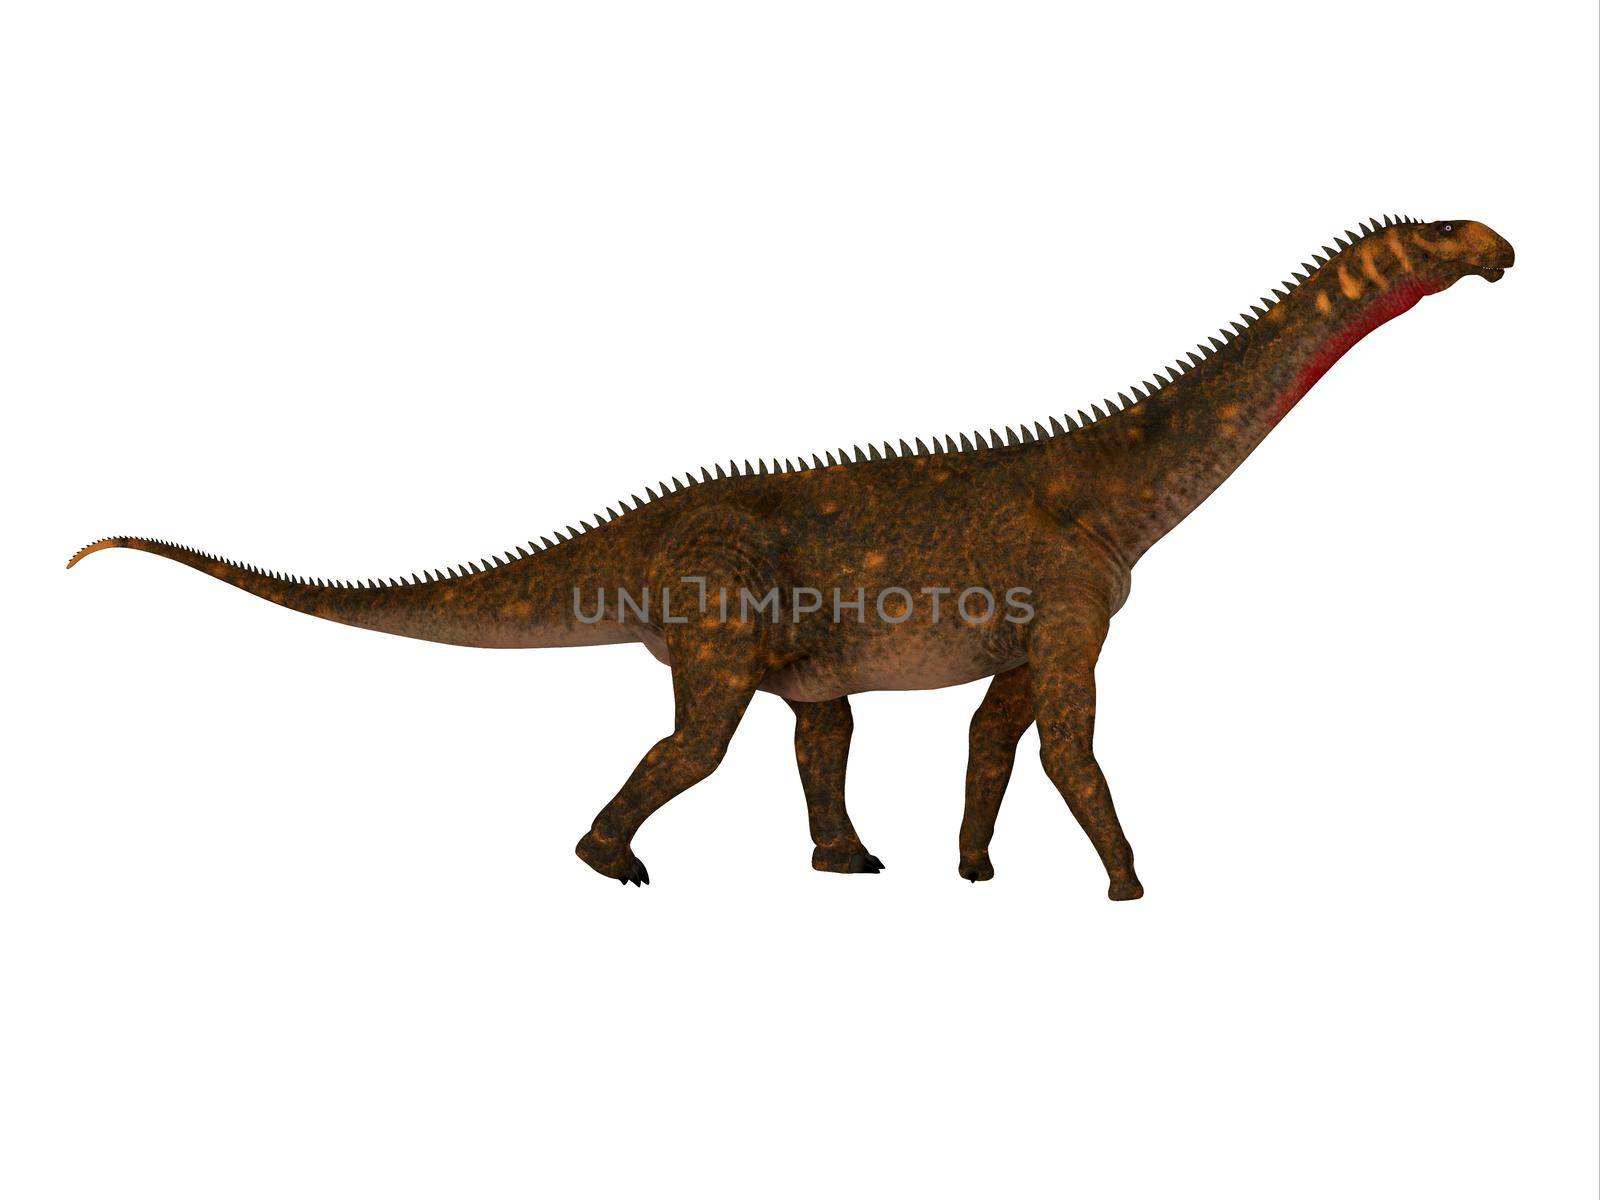 Mierasaurus was a herbivorous sauropod dinosaur that lived in Utah, USA during the Cretaceous Period.